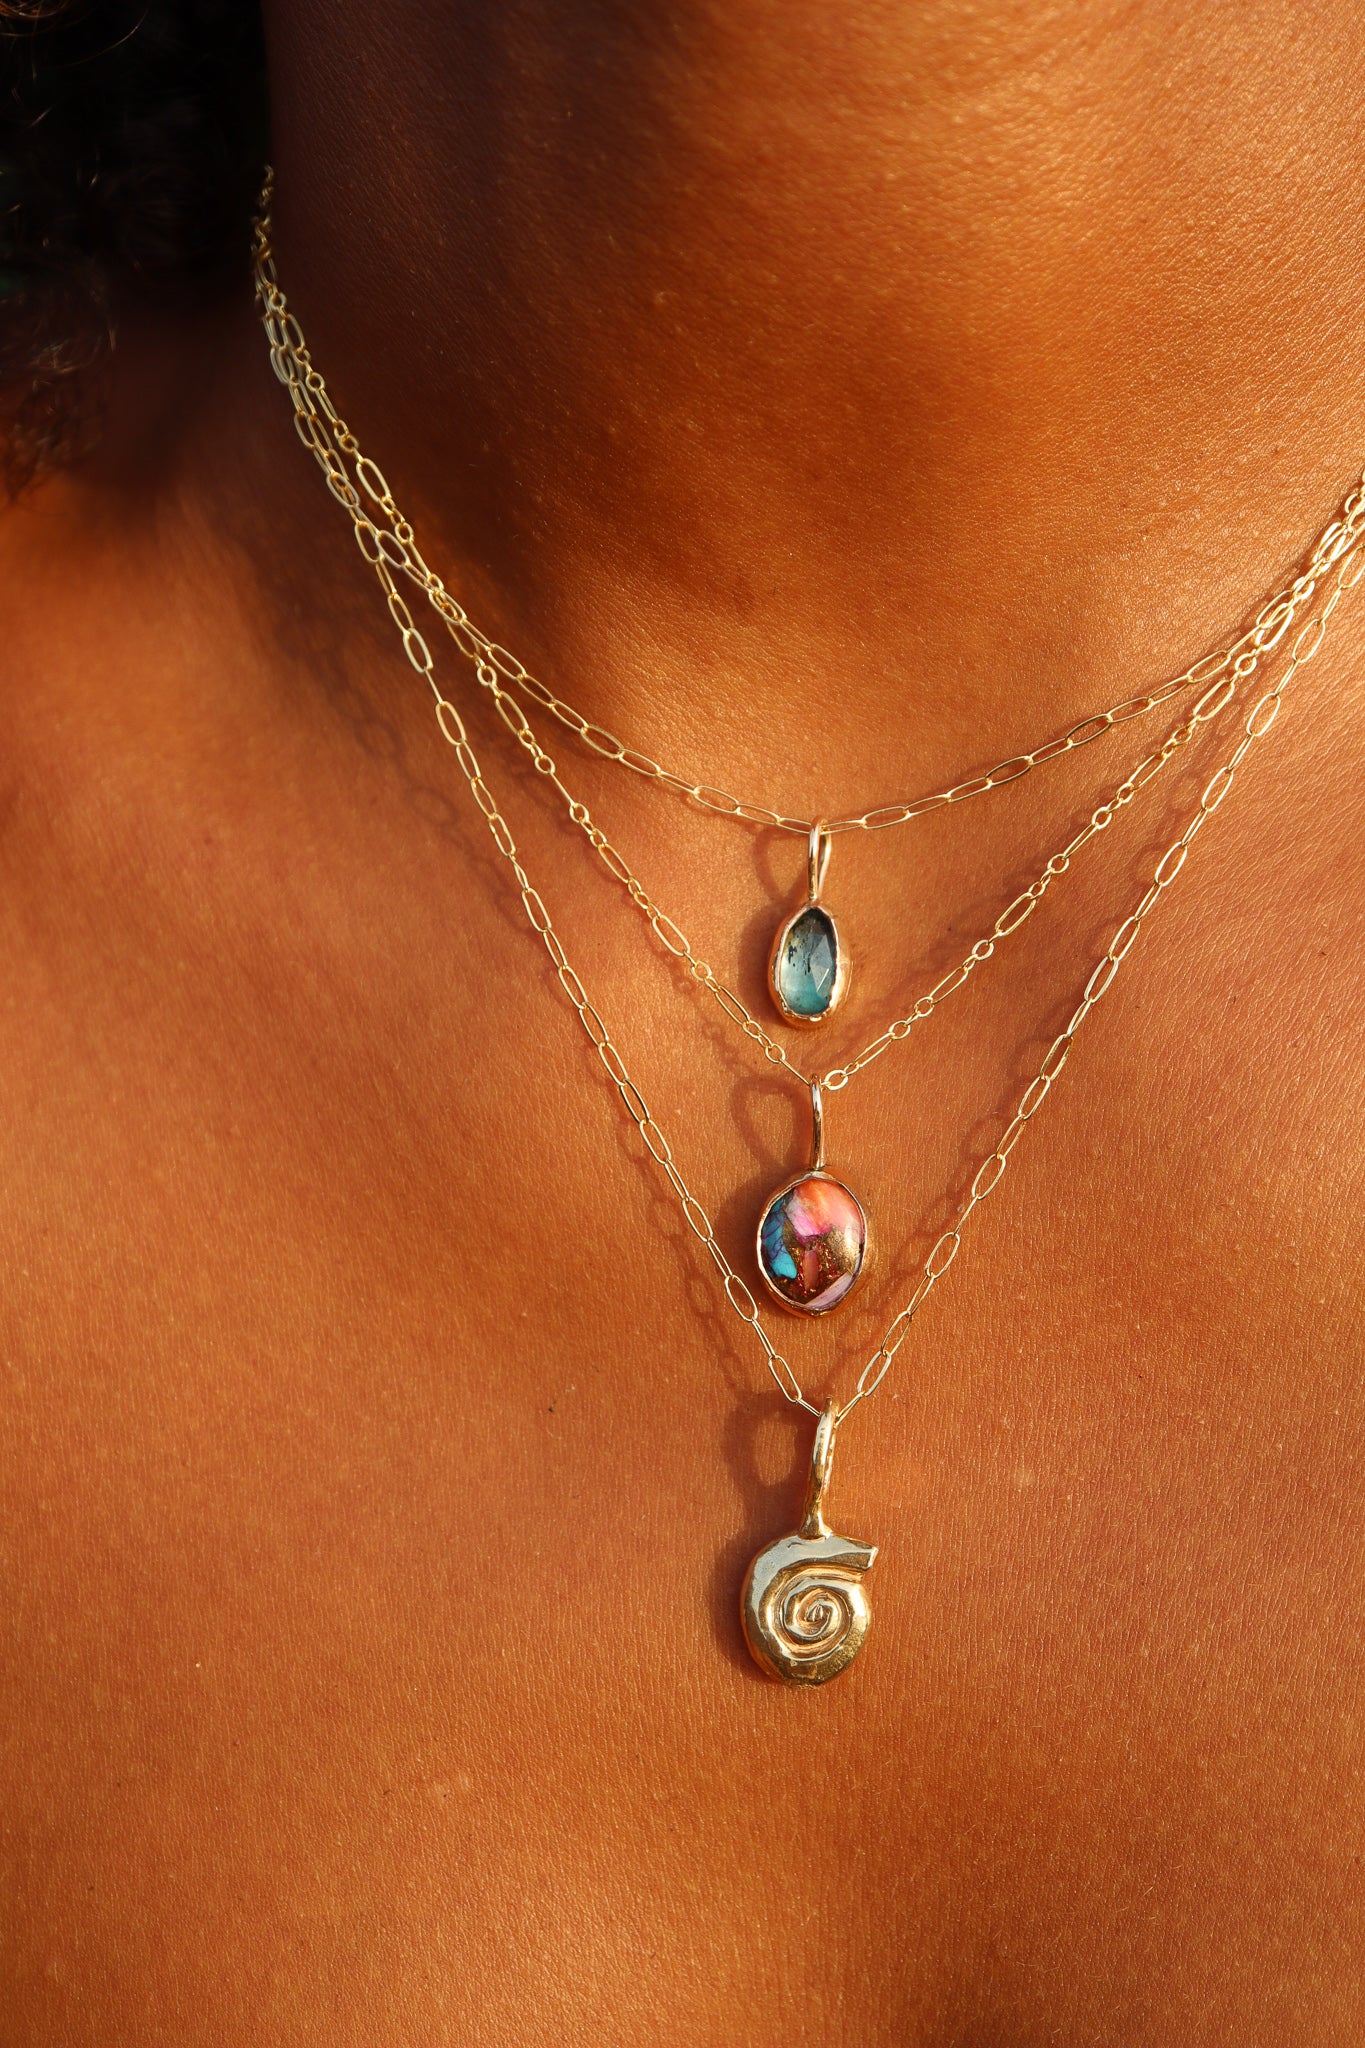 Sunset necklace